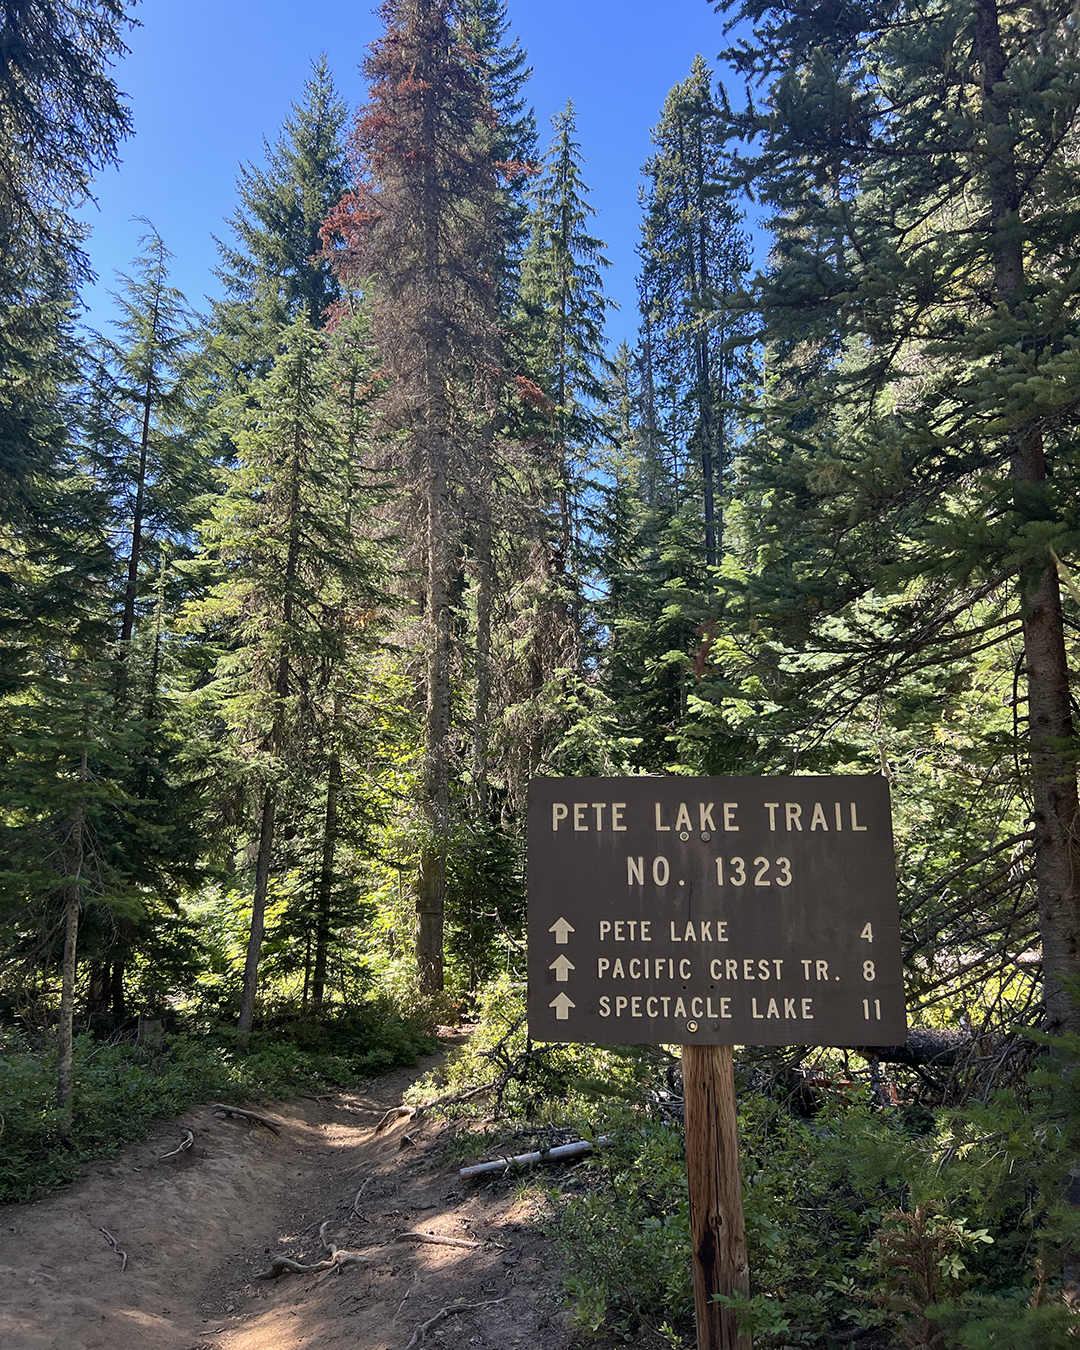  Just seeing ‘Pacific Crest Trail’ at the trailhead for Spectacle Lake got me so excited.  